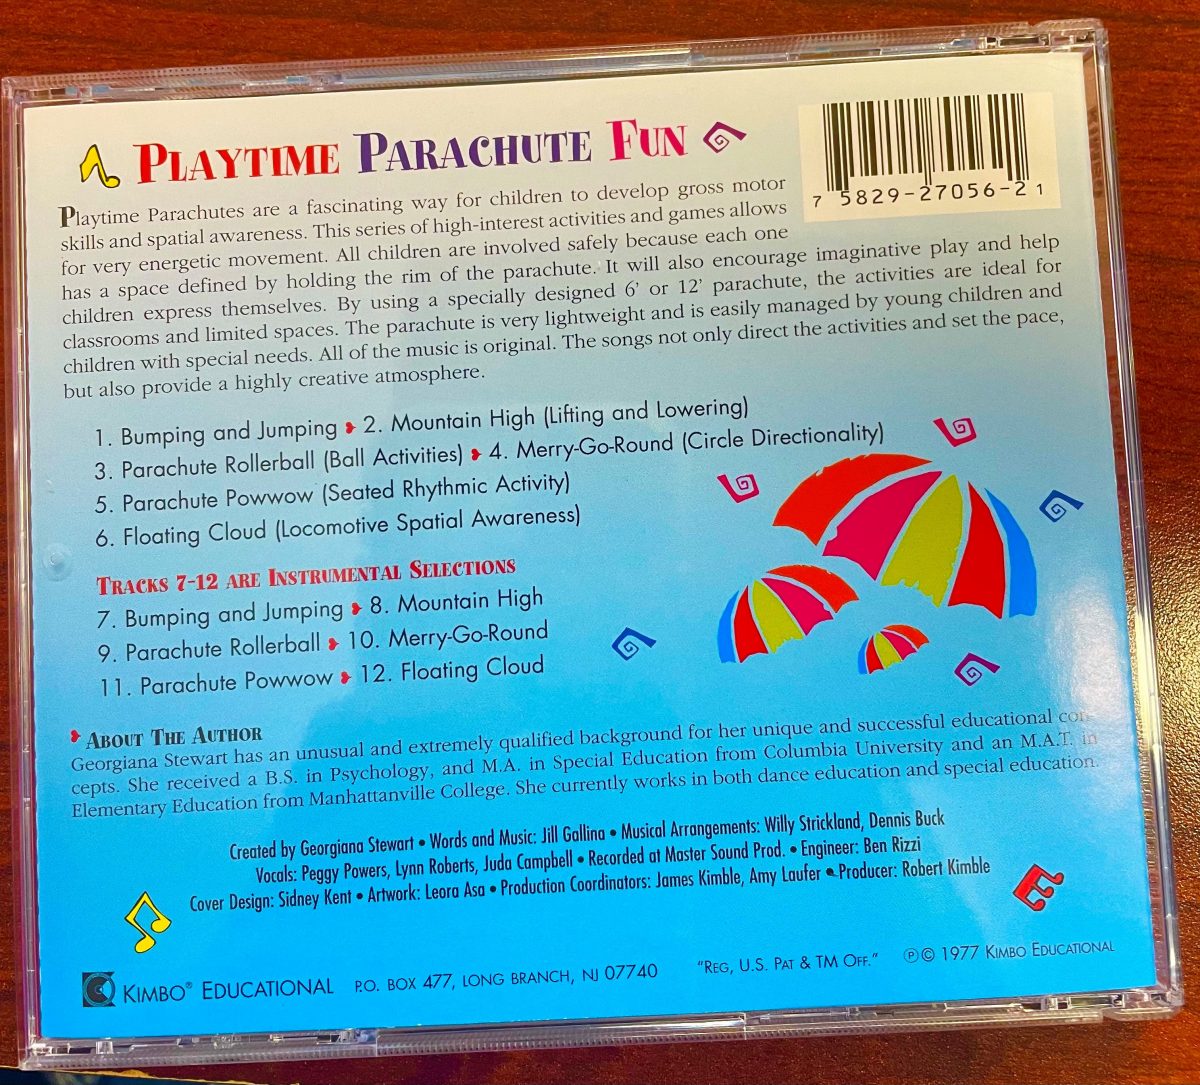 CD for Playtime Parachute Fun 